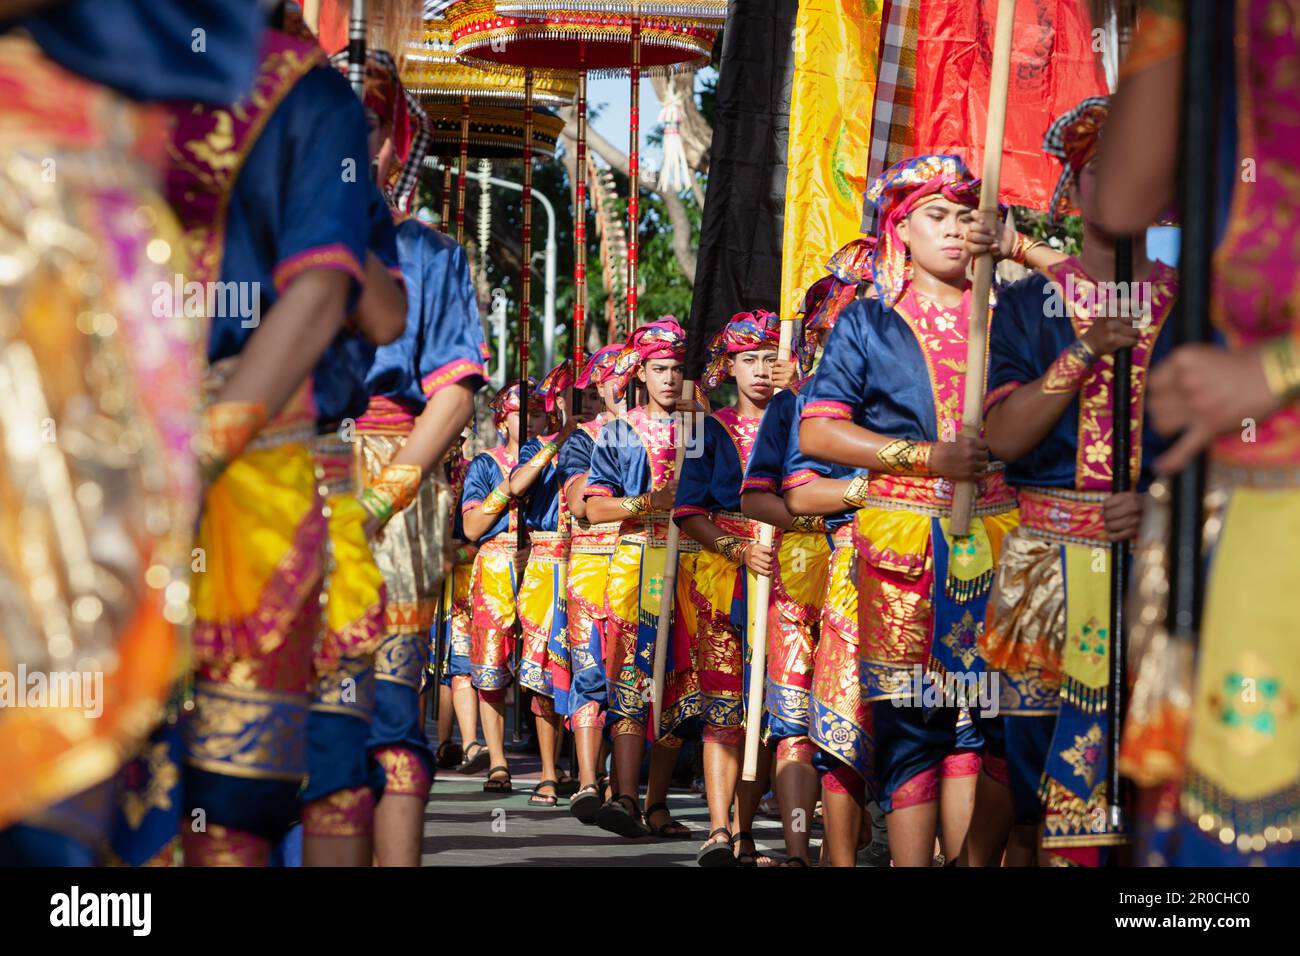 Denpasar, Bali island, Indonesia - June 11, 2016: Young men dressed in ethnic Balinese people costume before dancing traditional ritual temple dance Stock Photo